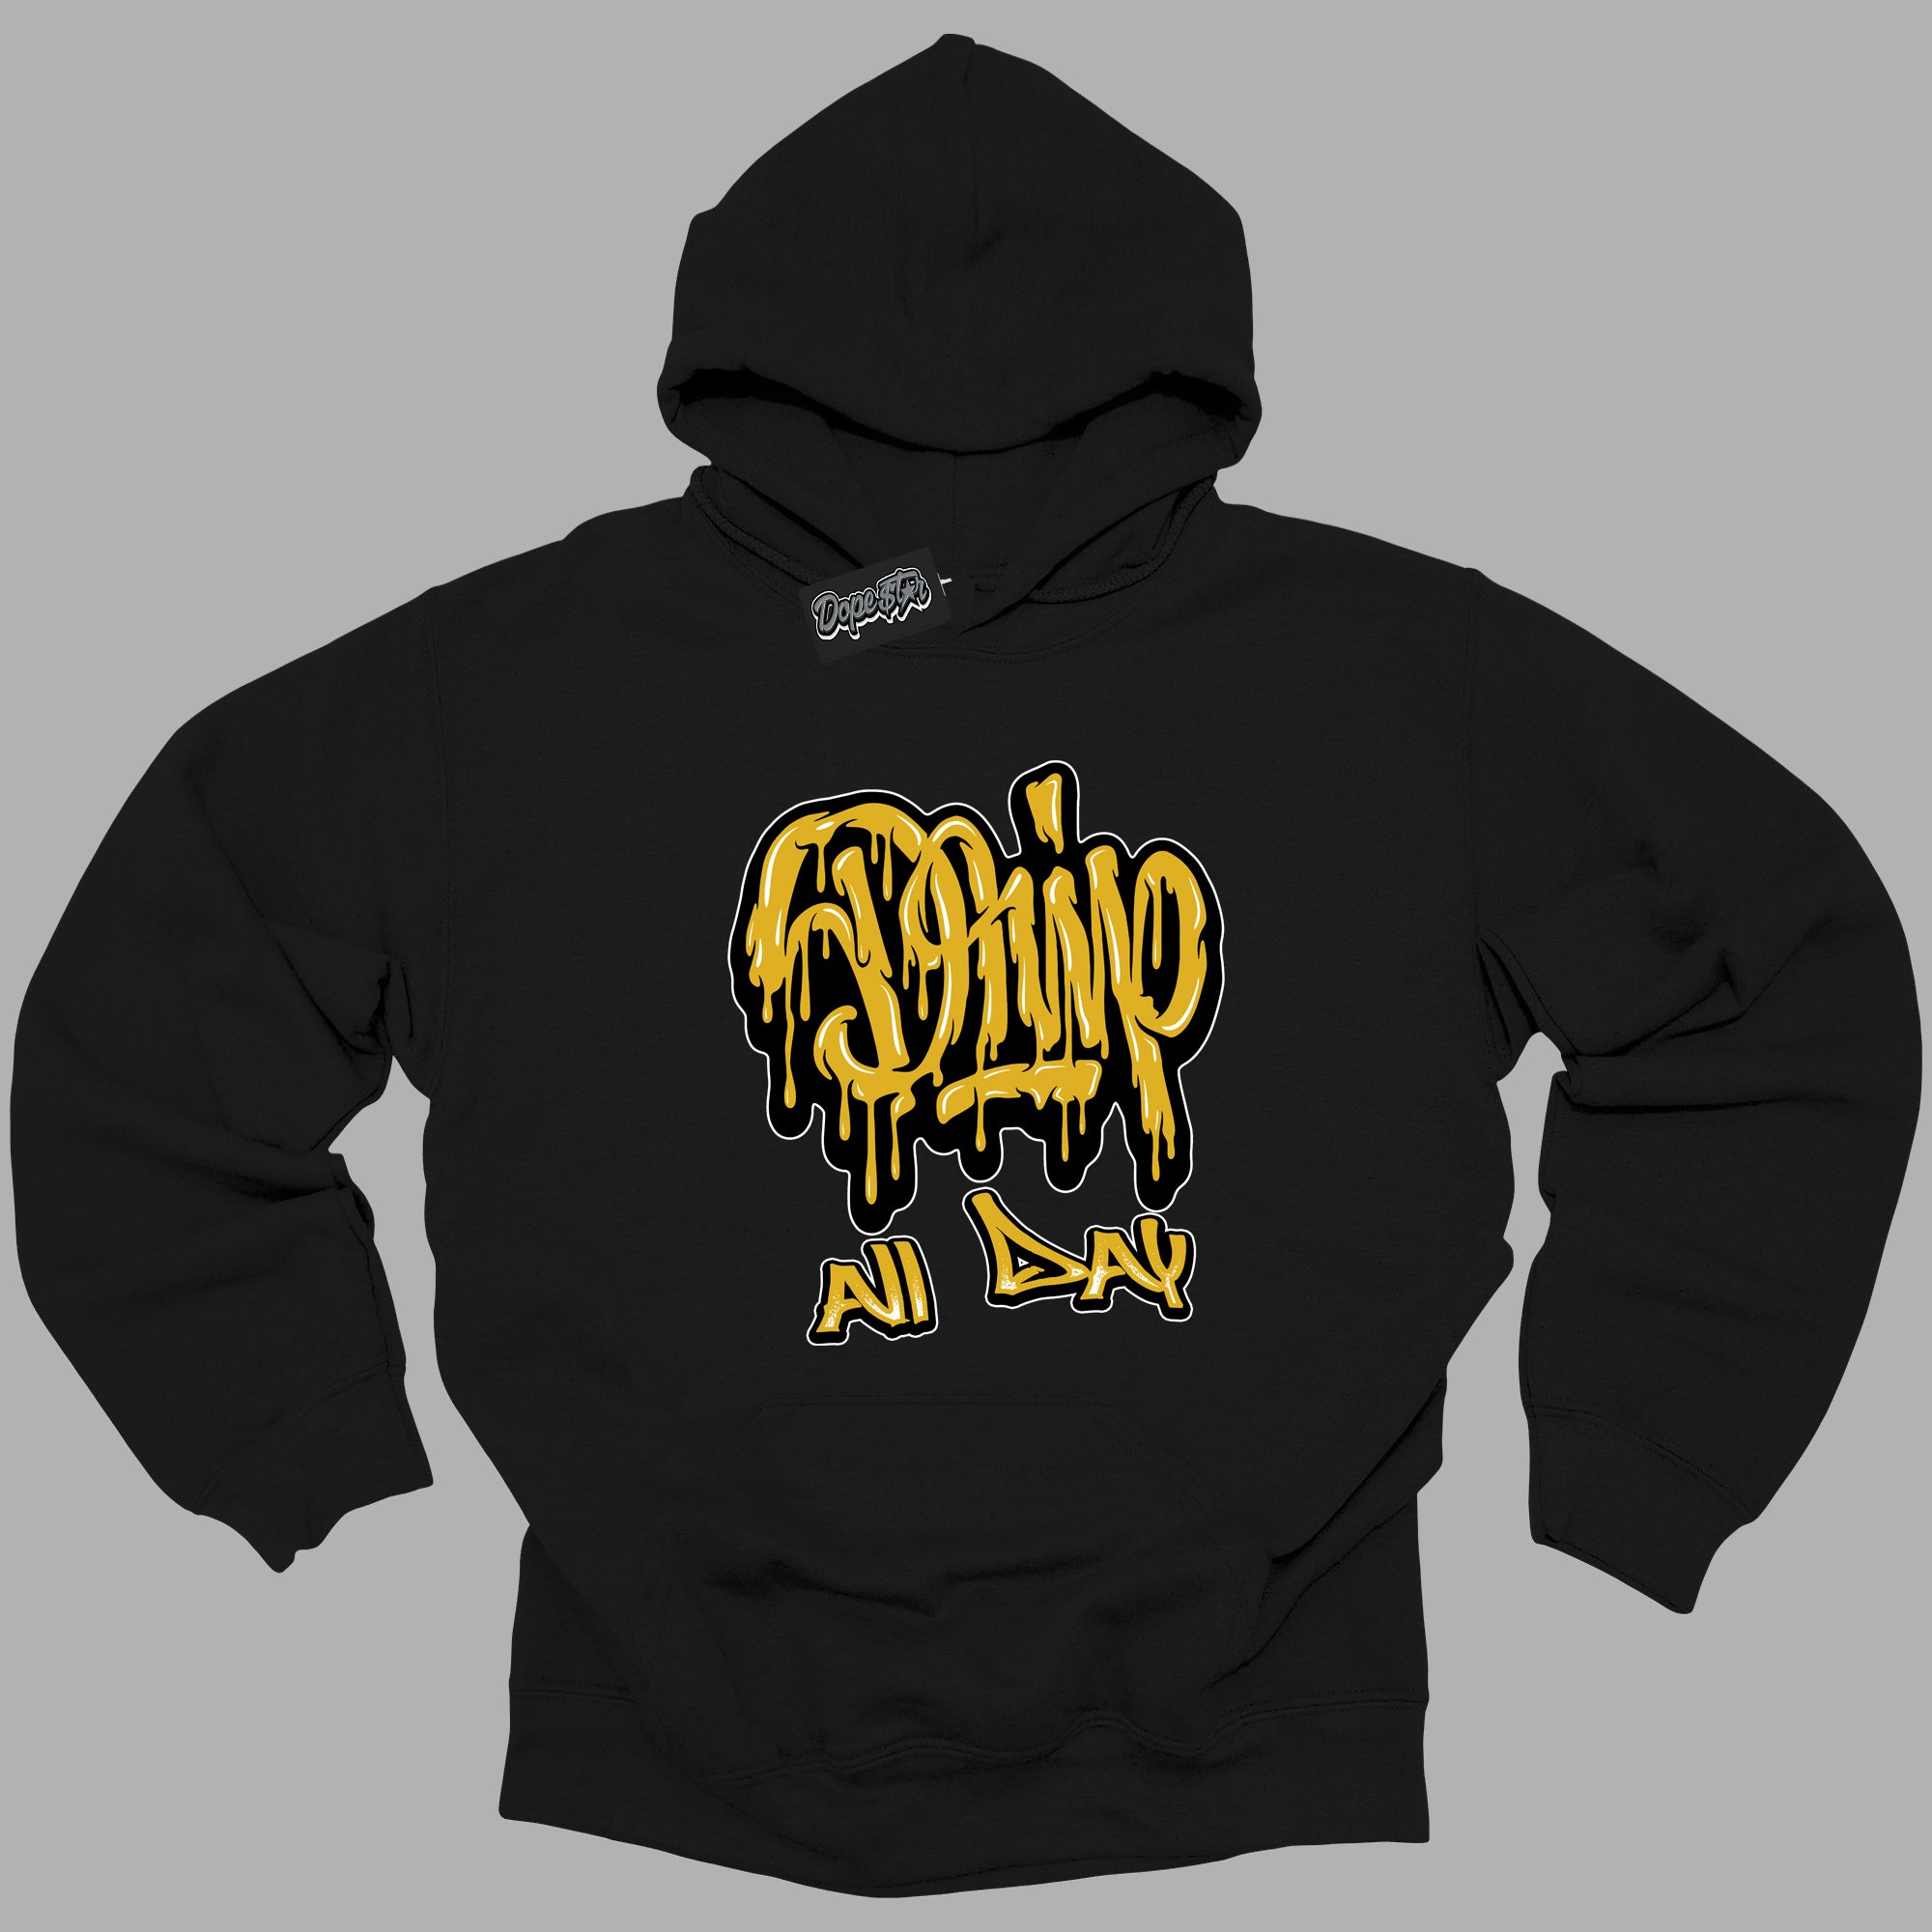 Cool Black Hoodie with “ Drip All Day ”  design that Perfectly Matches Yellow Ochre 6s Sneakers.